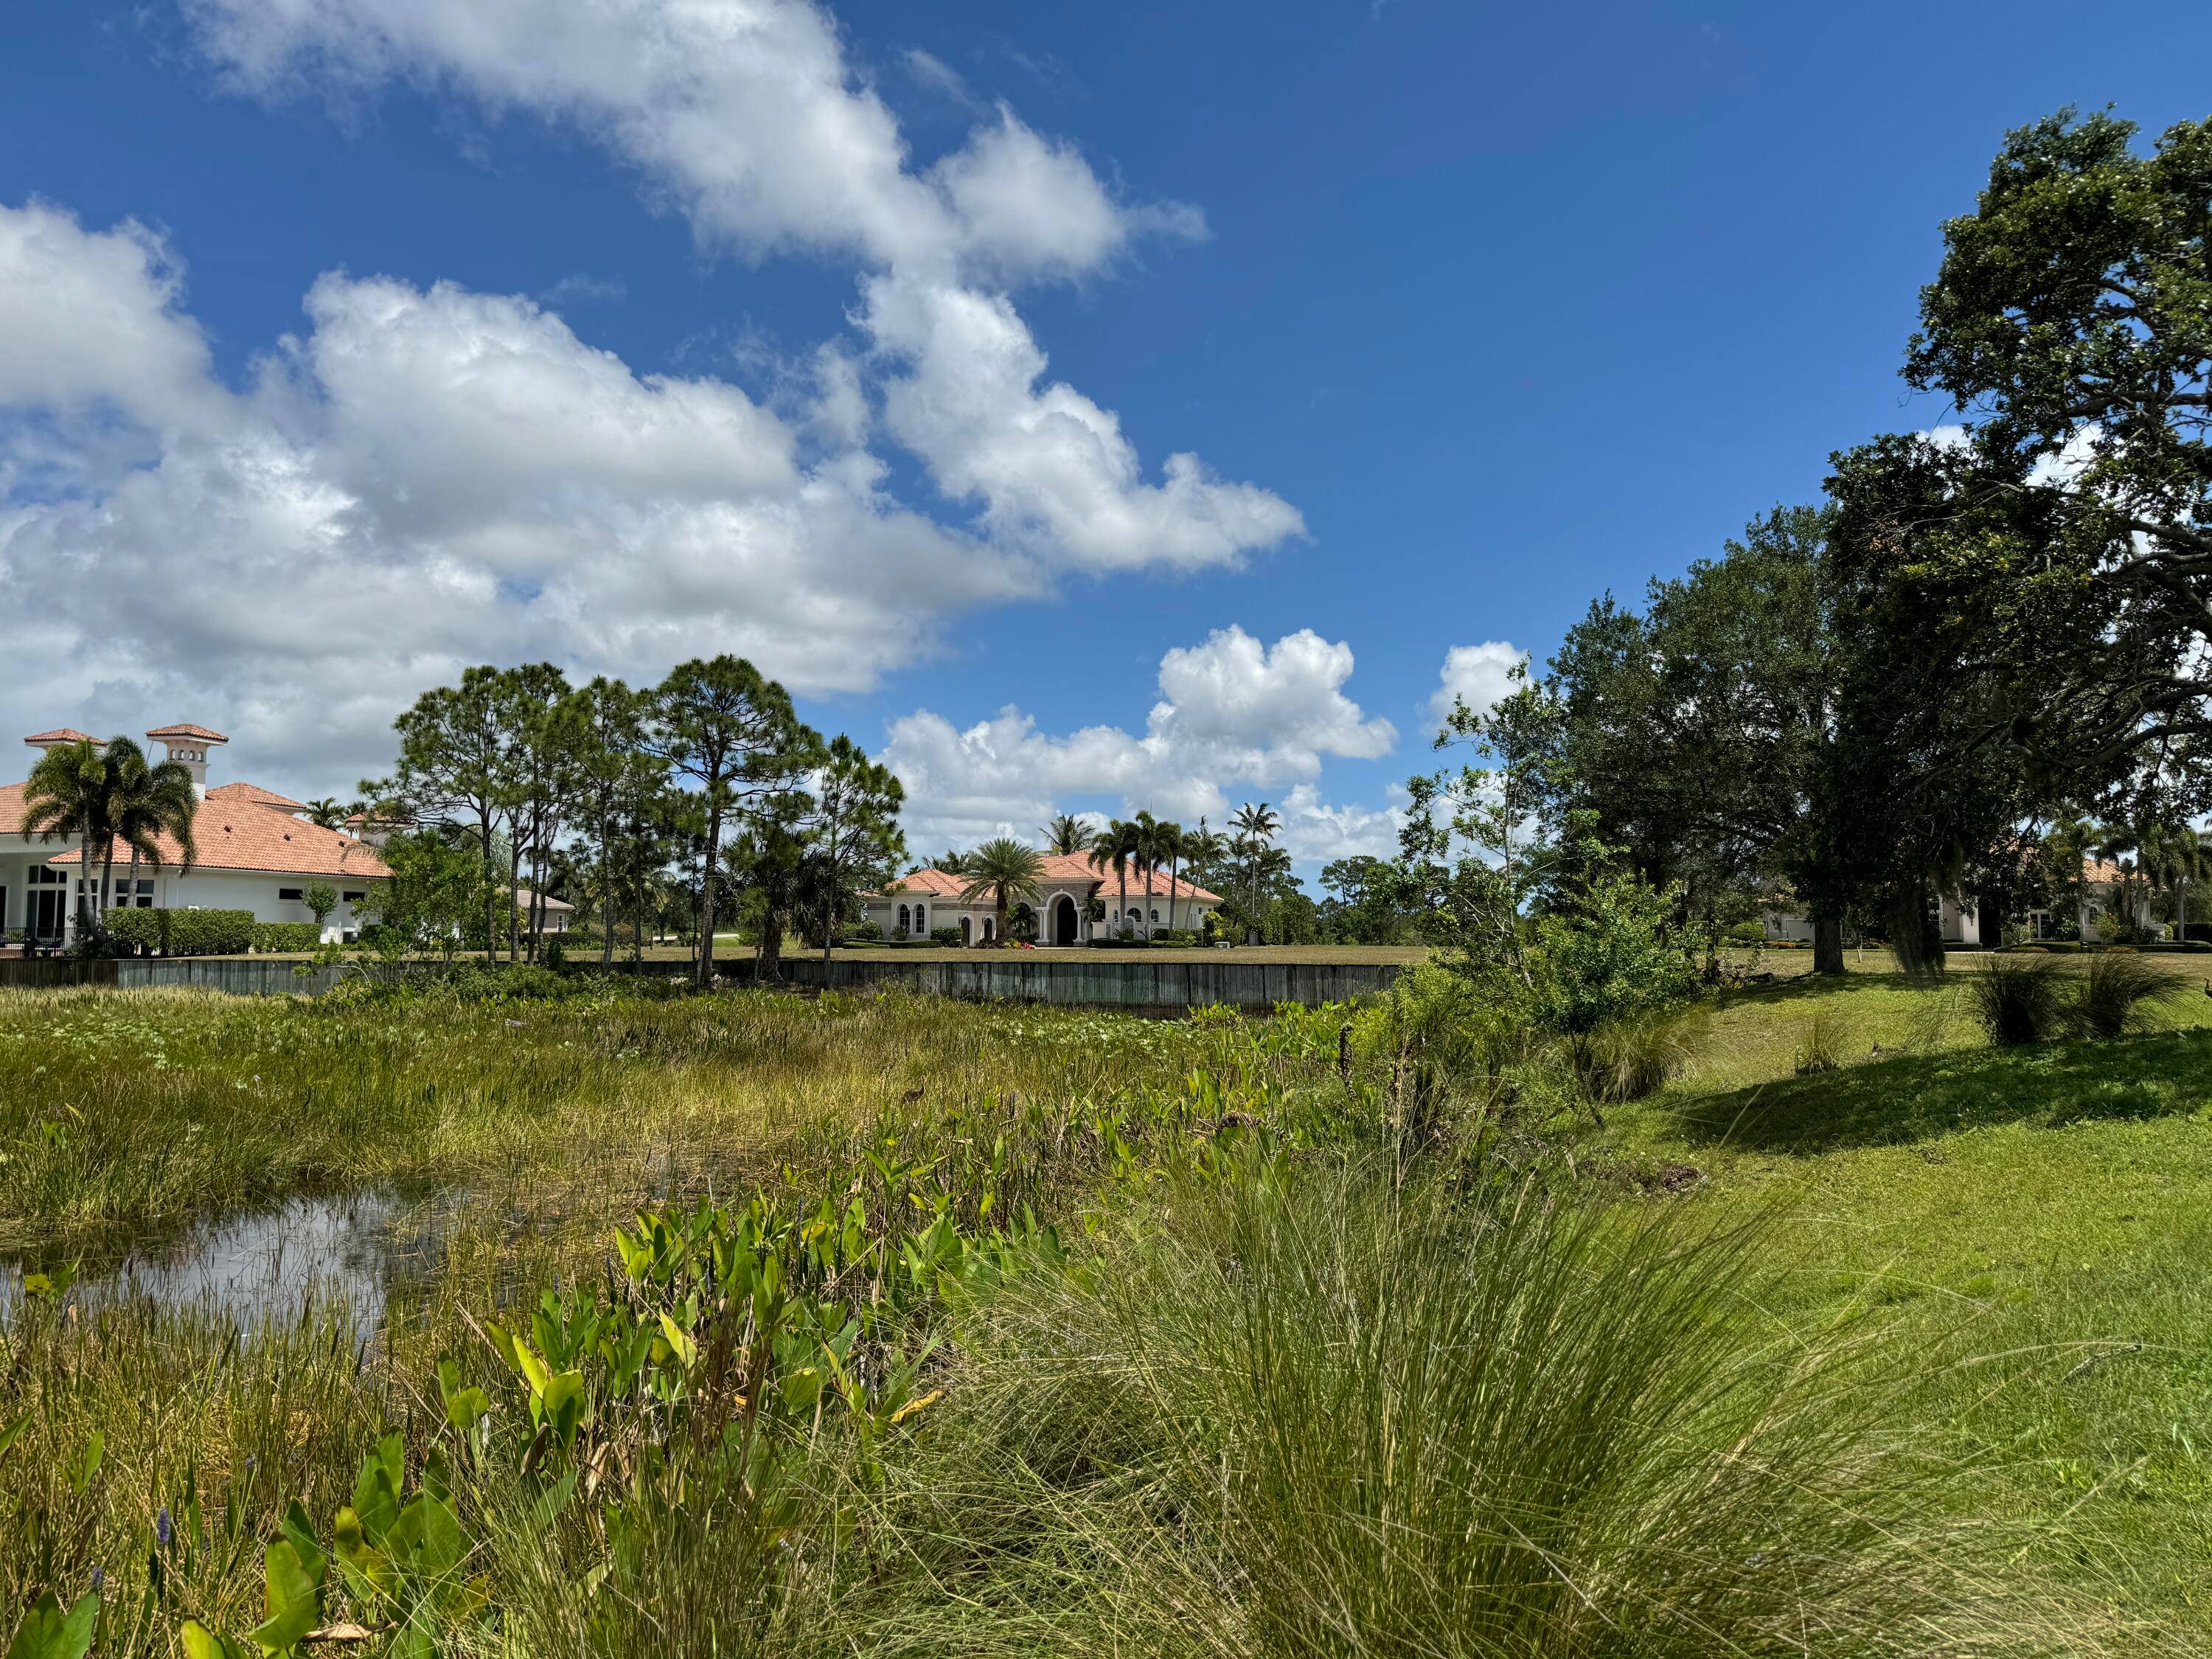 Located in Tesoro's estate section, the Home site has views over a pond to the 11th Tees of the Arnold Palmer GC.